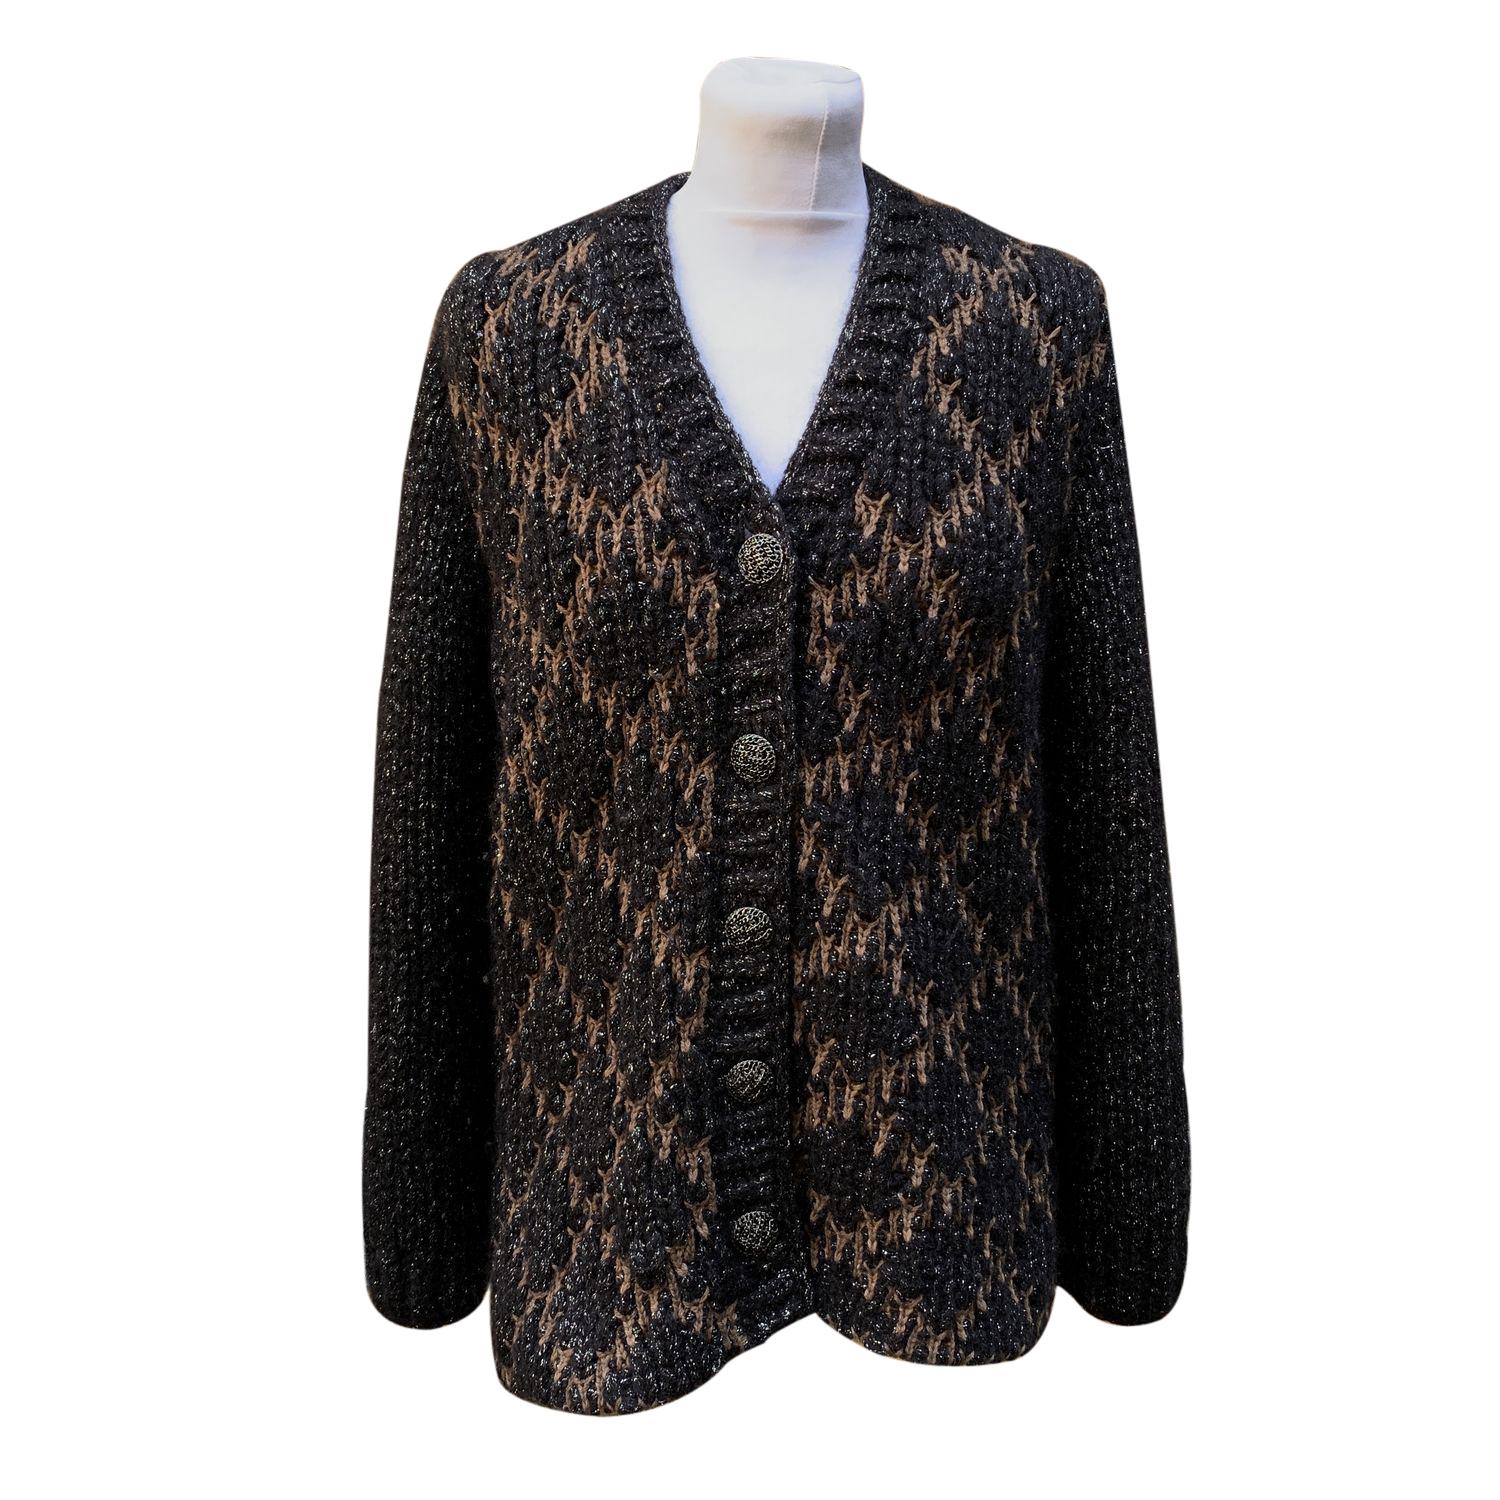 Chanel 2015 Black and Brown Lurex Knit Cardigan Size 40 FR In Excellent Condition For Sale In Rome, Rome